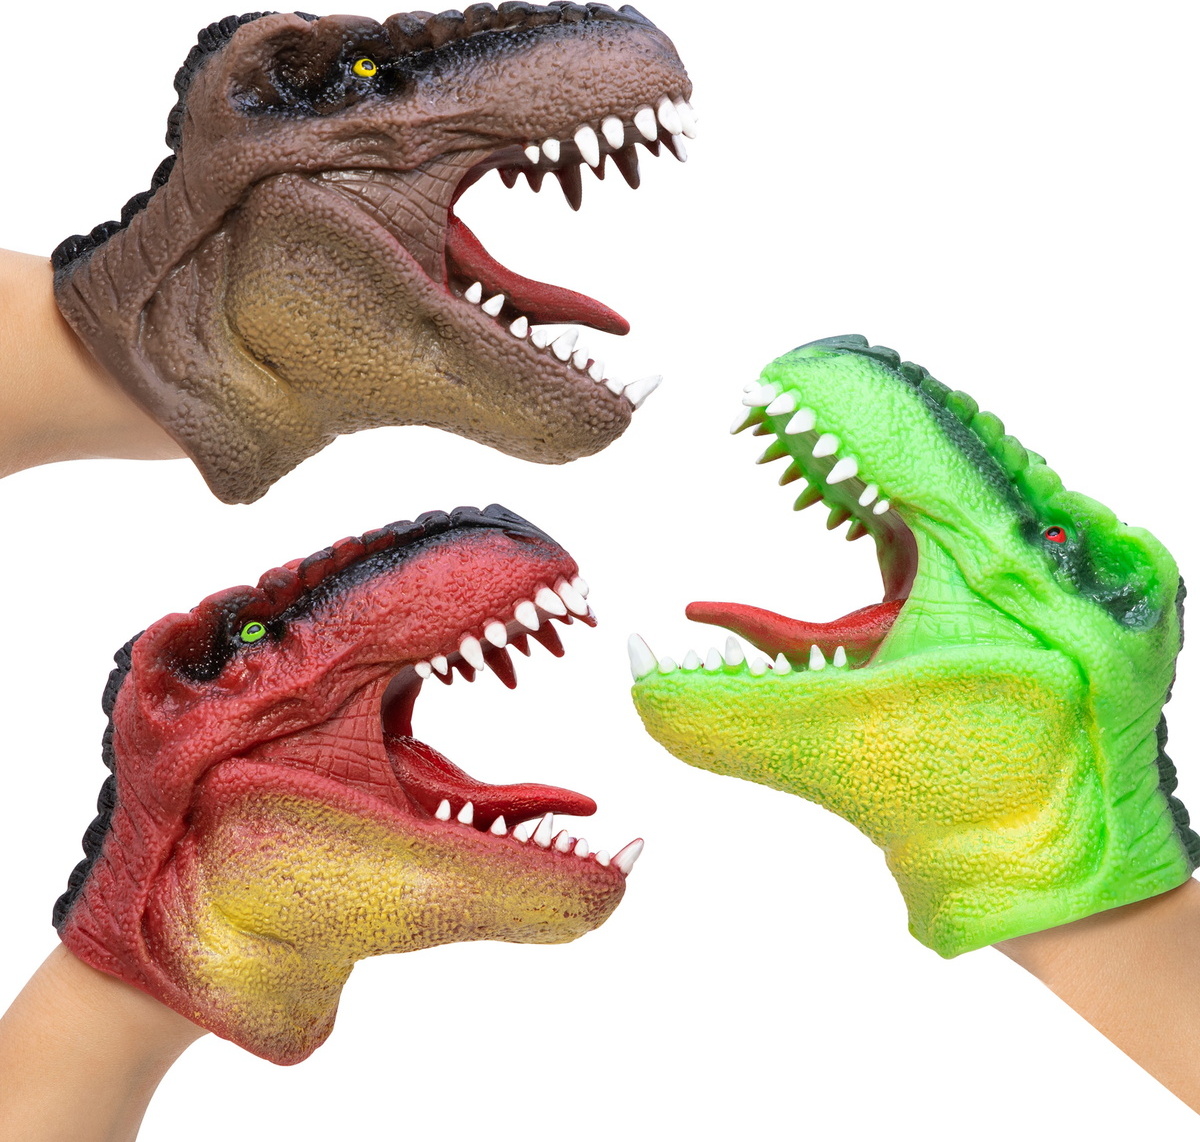 1 EA Schylling Dino Hand Puppet